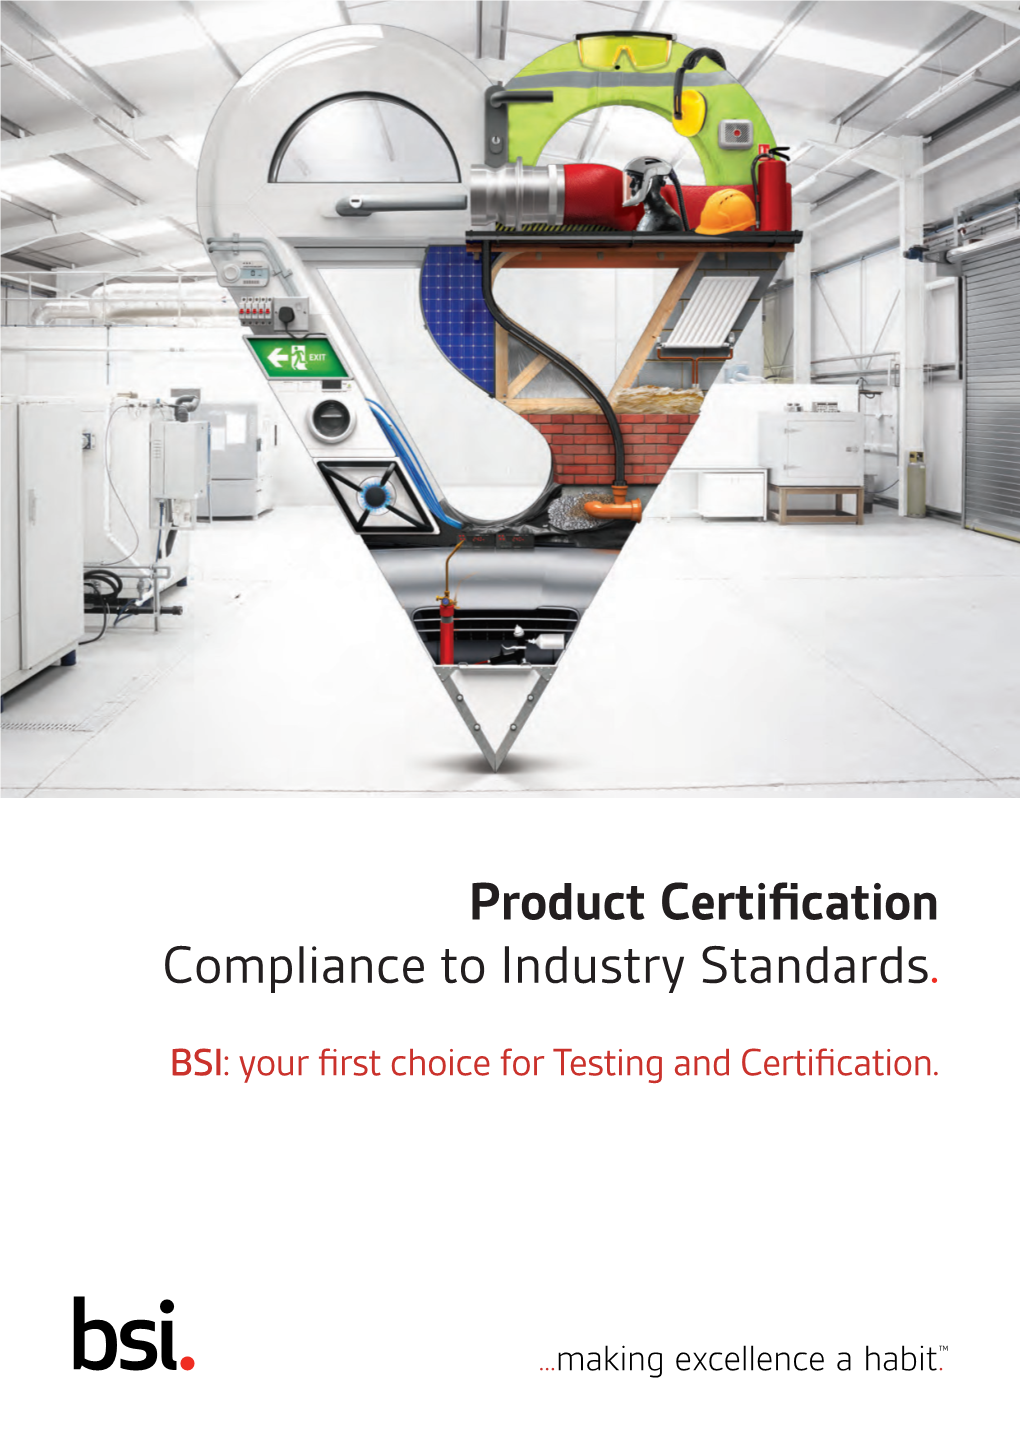 Product Certification Compliance to Industry Standards